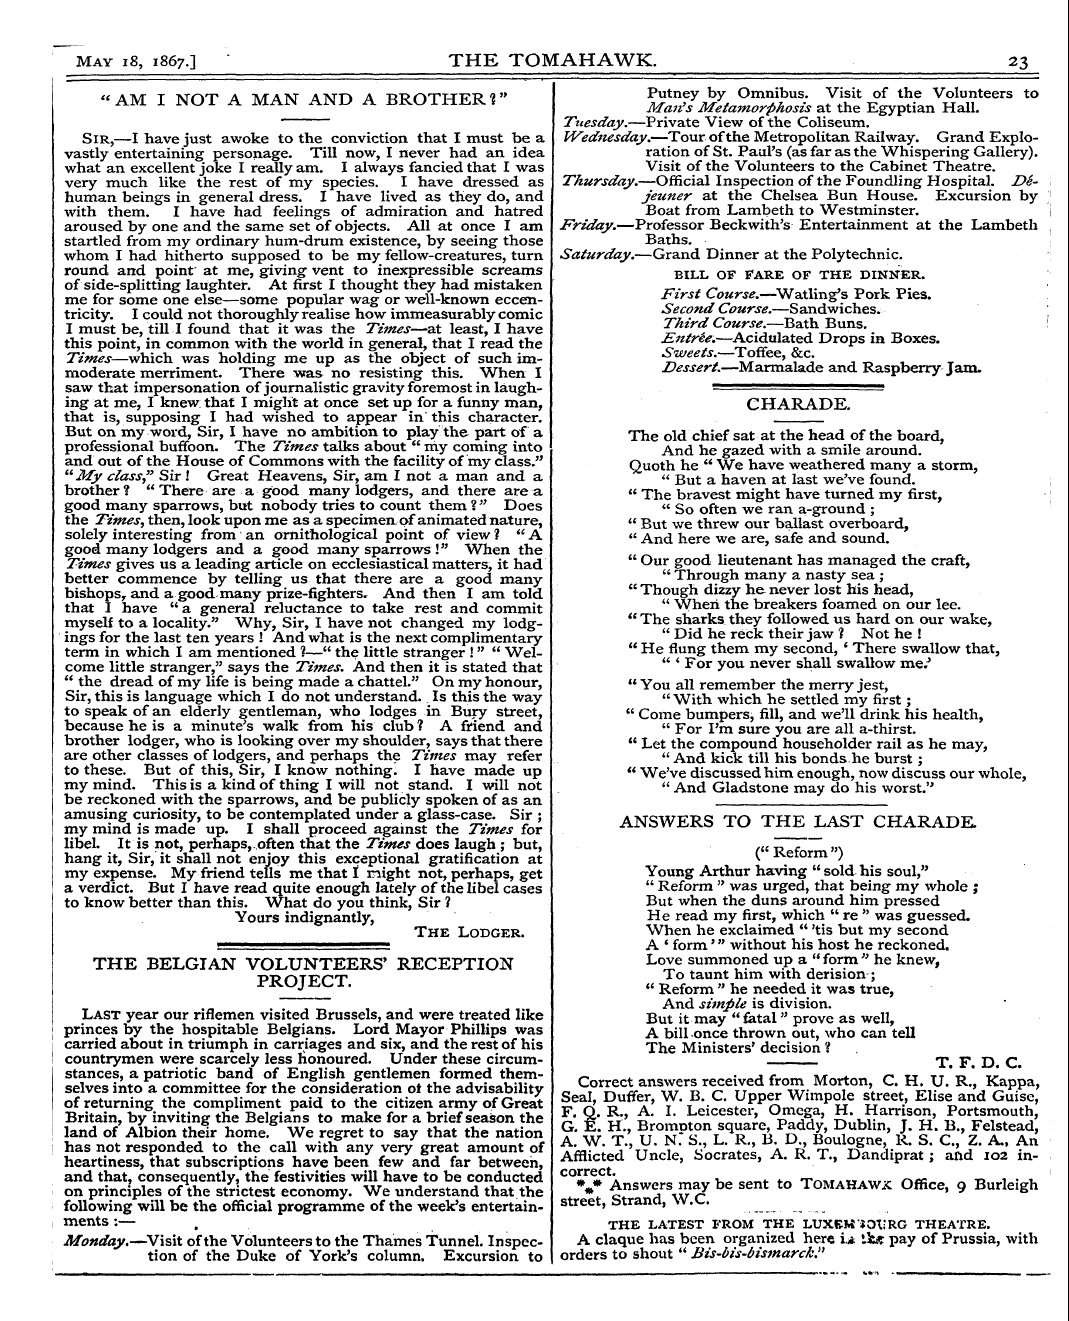 Tomahawk (1867-1870): jS F Y, 1st edition - Answers To The Last Charade.